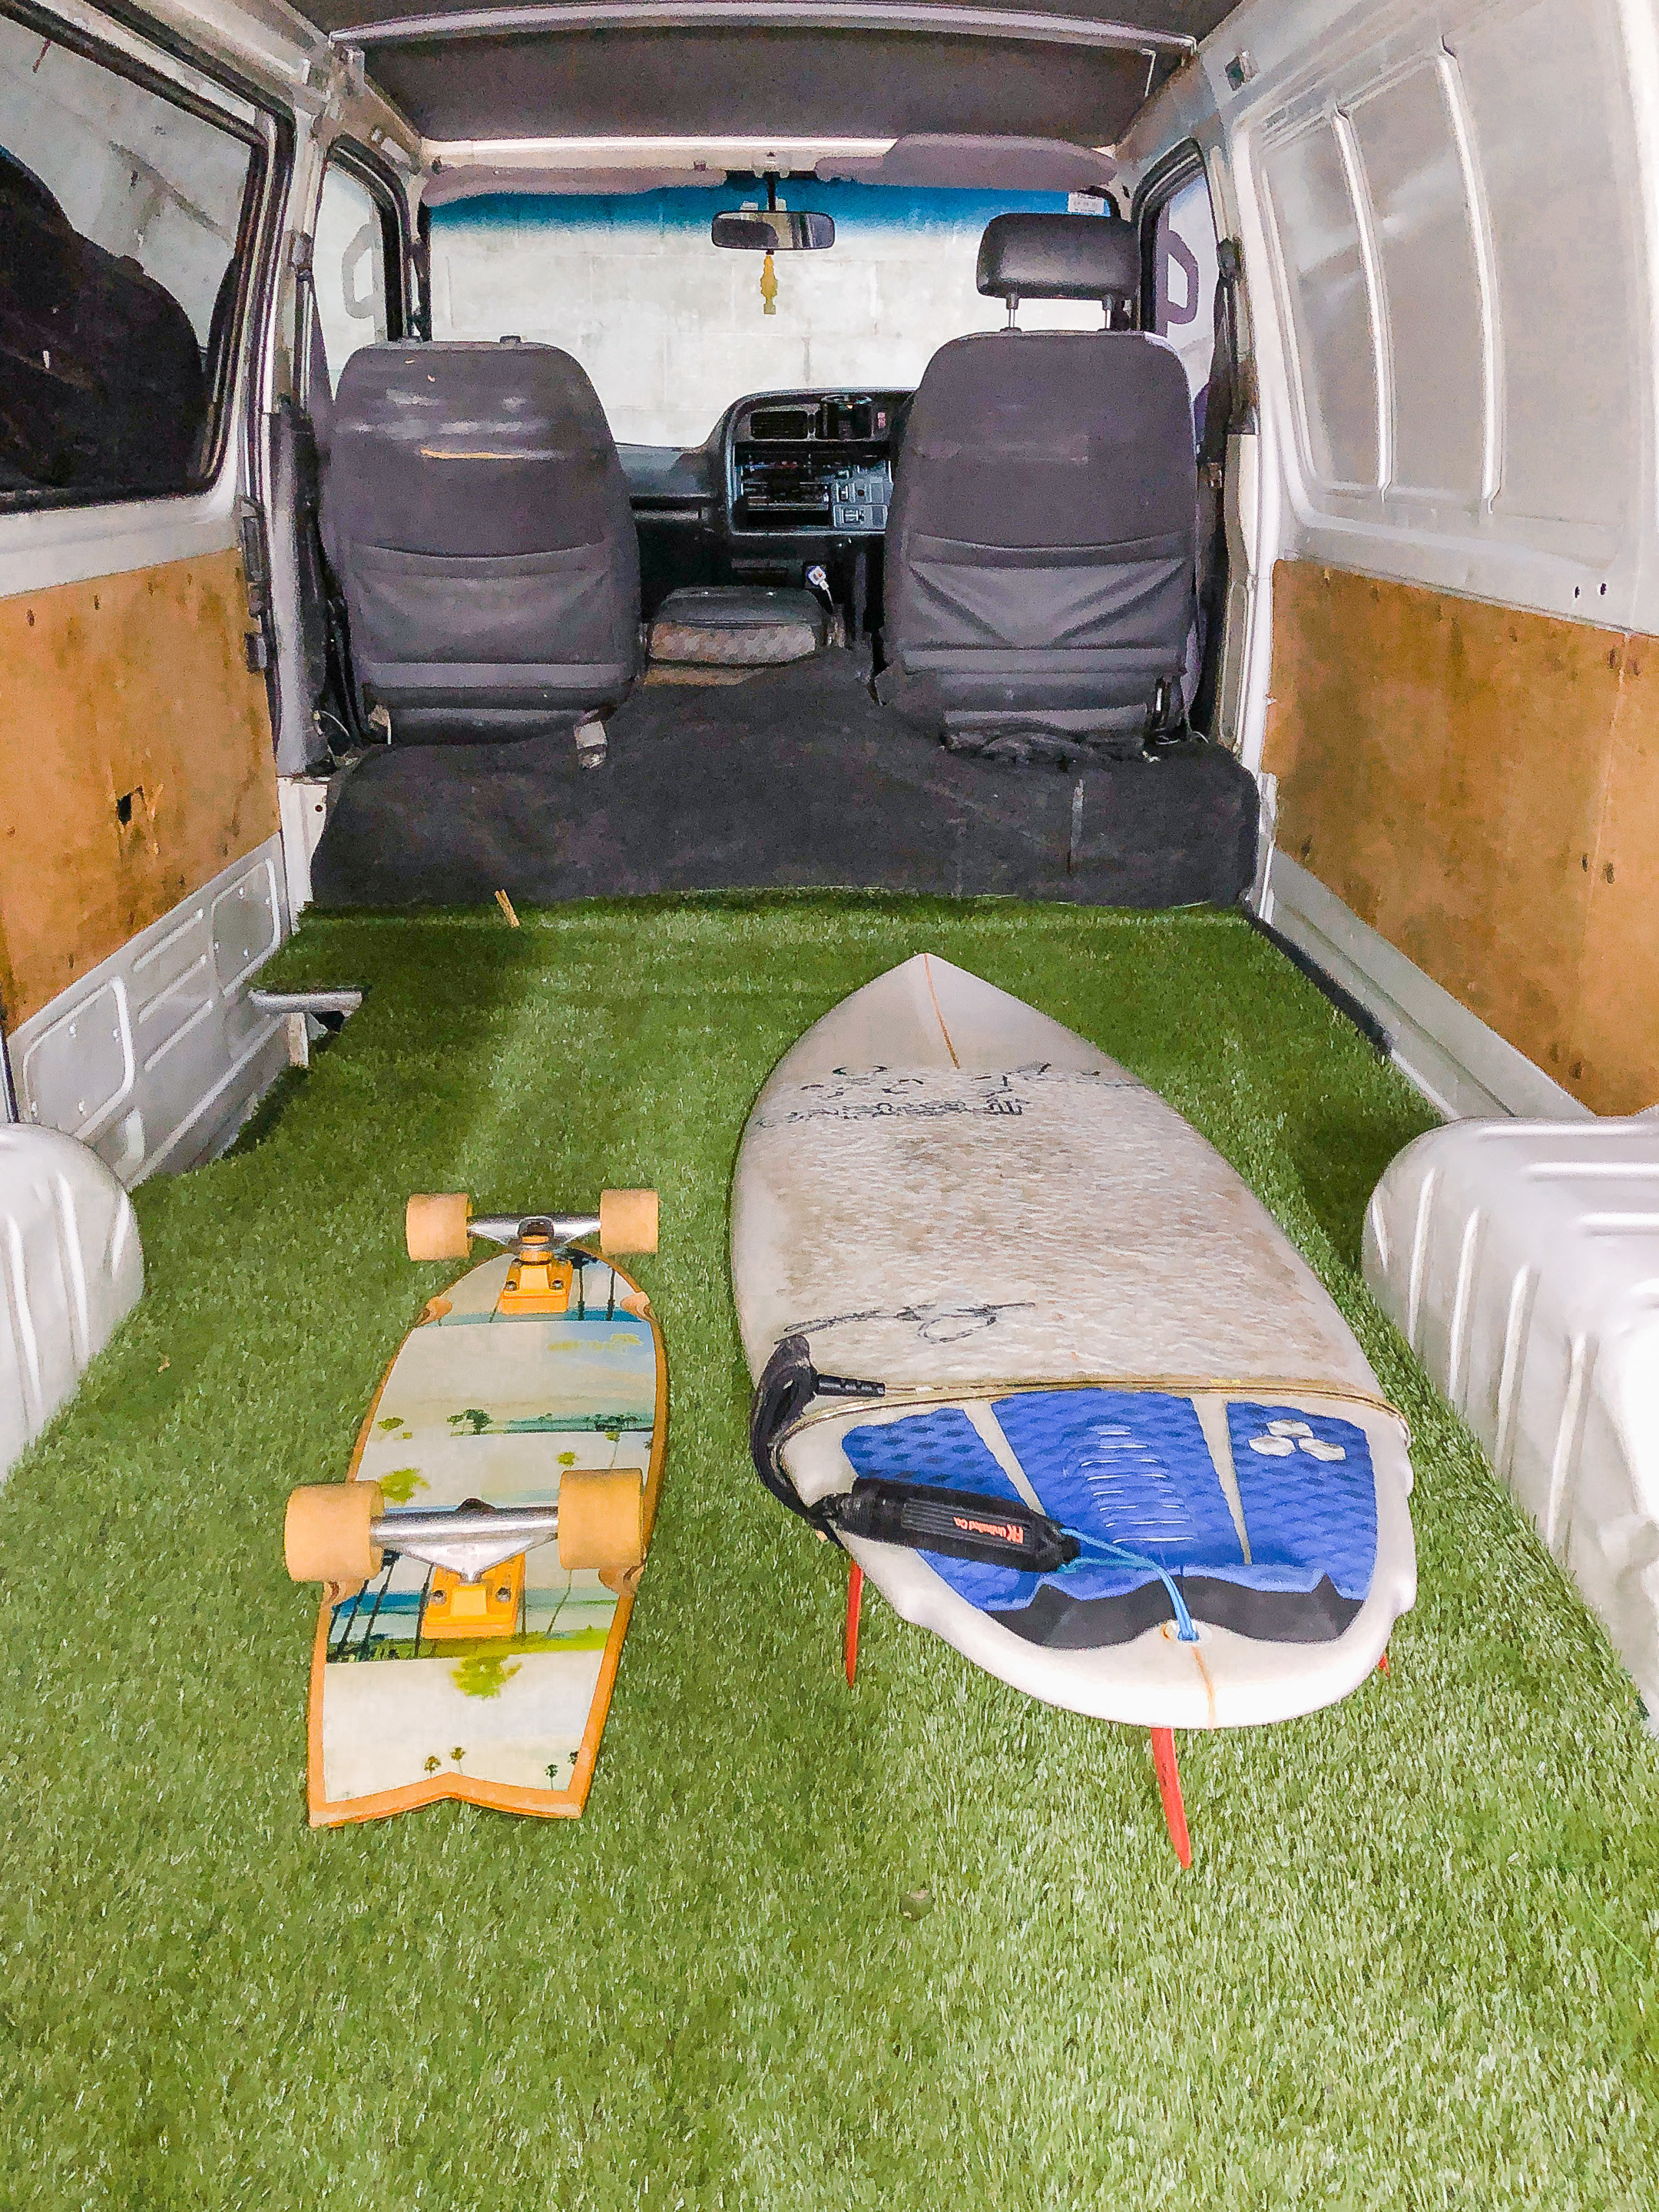 Photo of empty van with grass in the back, a skateboard, and a surfboard